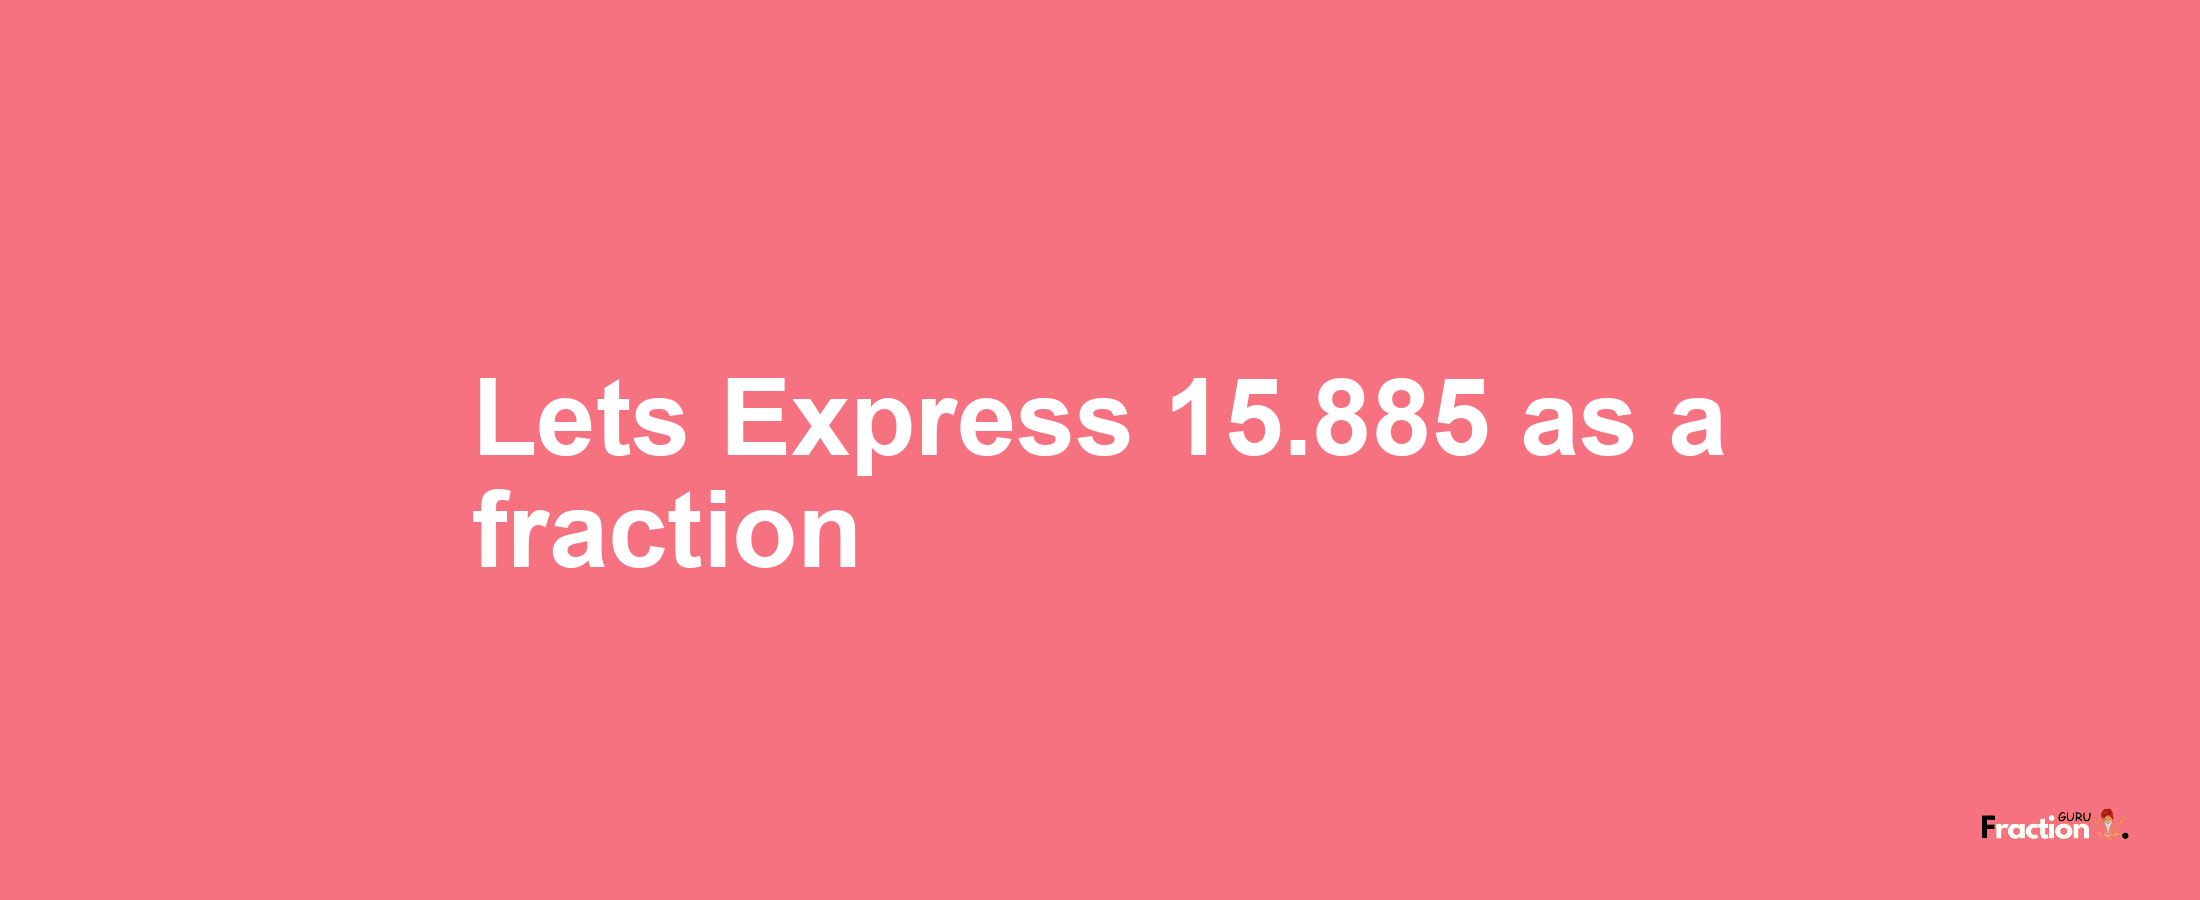 Lets Express 15.885 as afraction